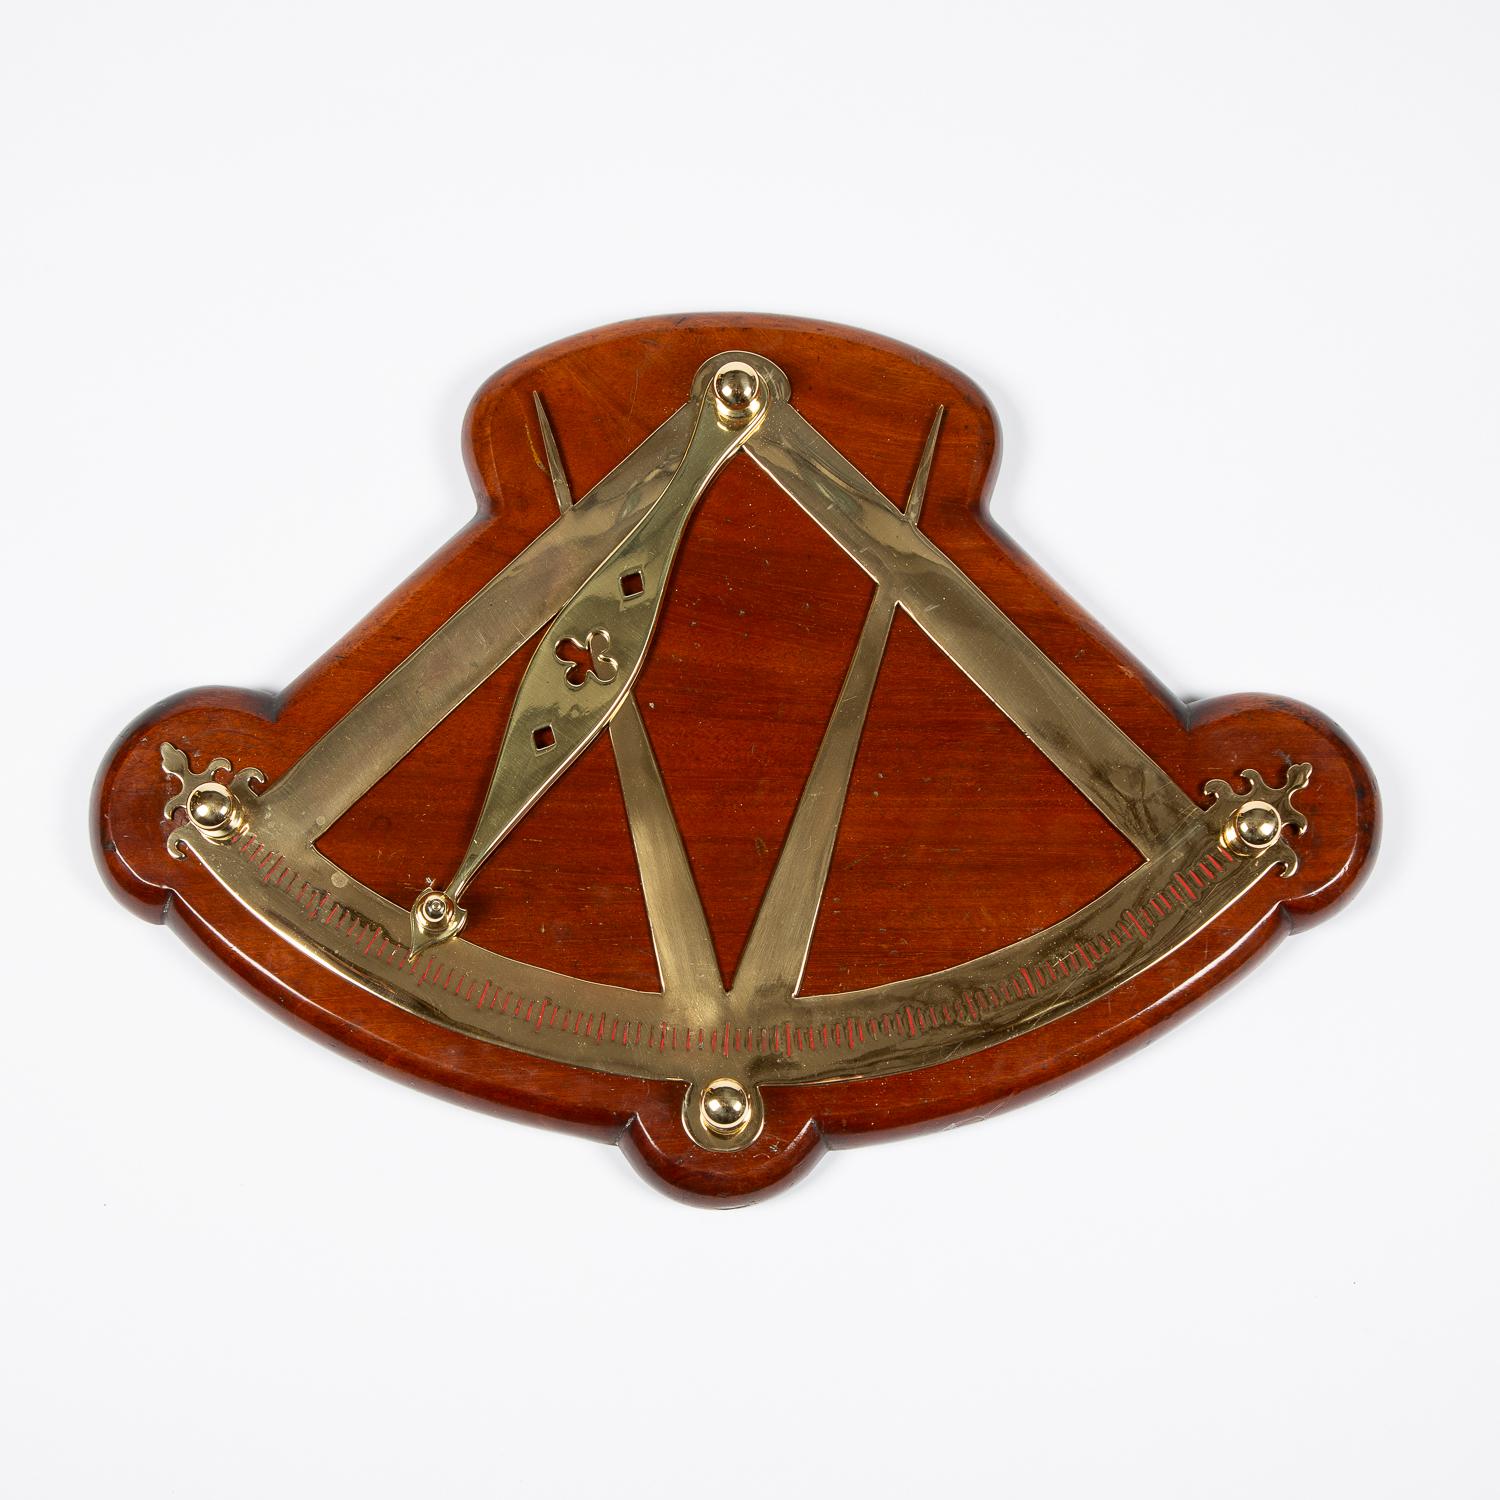 A wall mounted 1920's brass ship's inclinometer in the form of a quadrant and dividers, on a moulded mahogany back board.

Scale in degrees from the vertical to 45° of tilt/list.

An inclinometer, or clinometer, is an instrument used for measuring